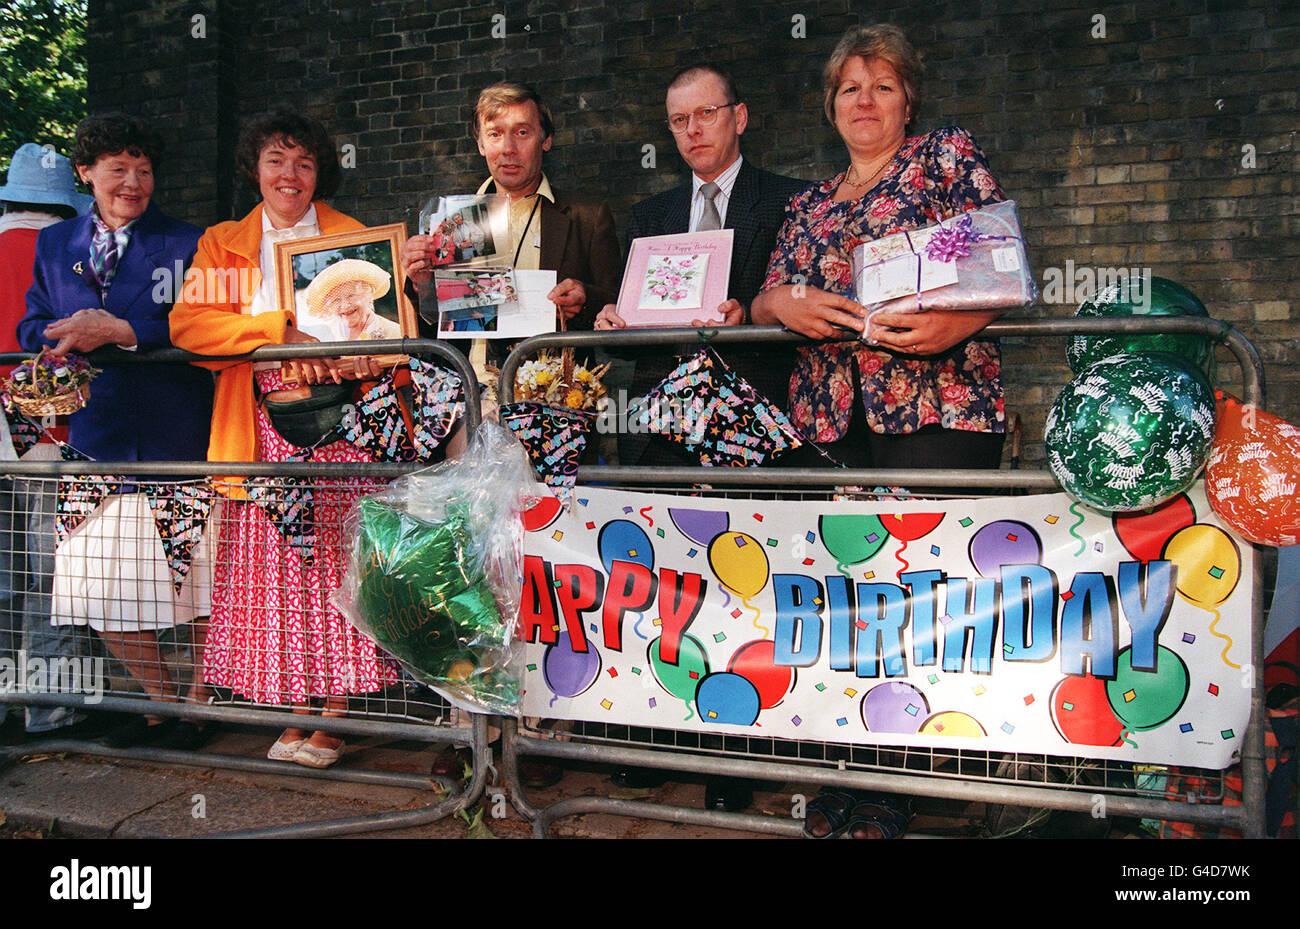 Wellwishers from left to right, Iris Halfpenny from Leicester, Sheila Clark from Glasgow, Alan Morton from Edinburgh, Alan Rudd from West Dulwich and Jennifer Hawkins from Worthing queue outside Clarence House with gifts for the Queen Mother who celebrates her 98th birthday today (Tuesday). Photo by John Stillwell/PA. Stock Photo